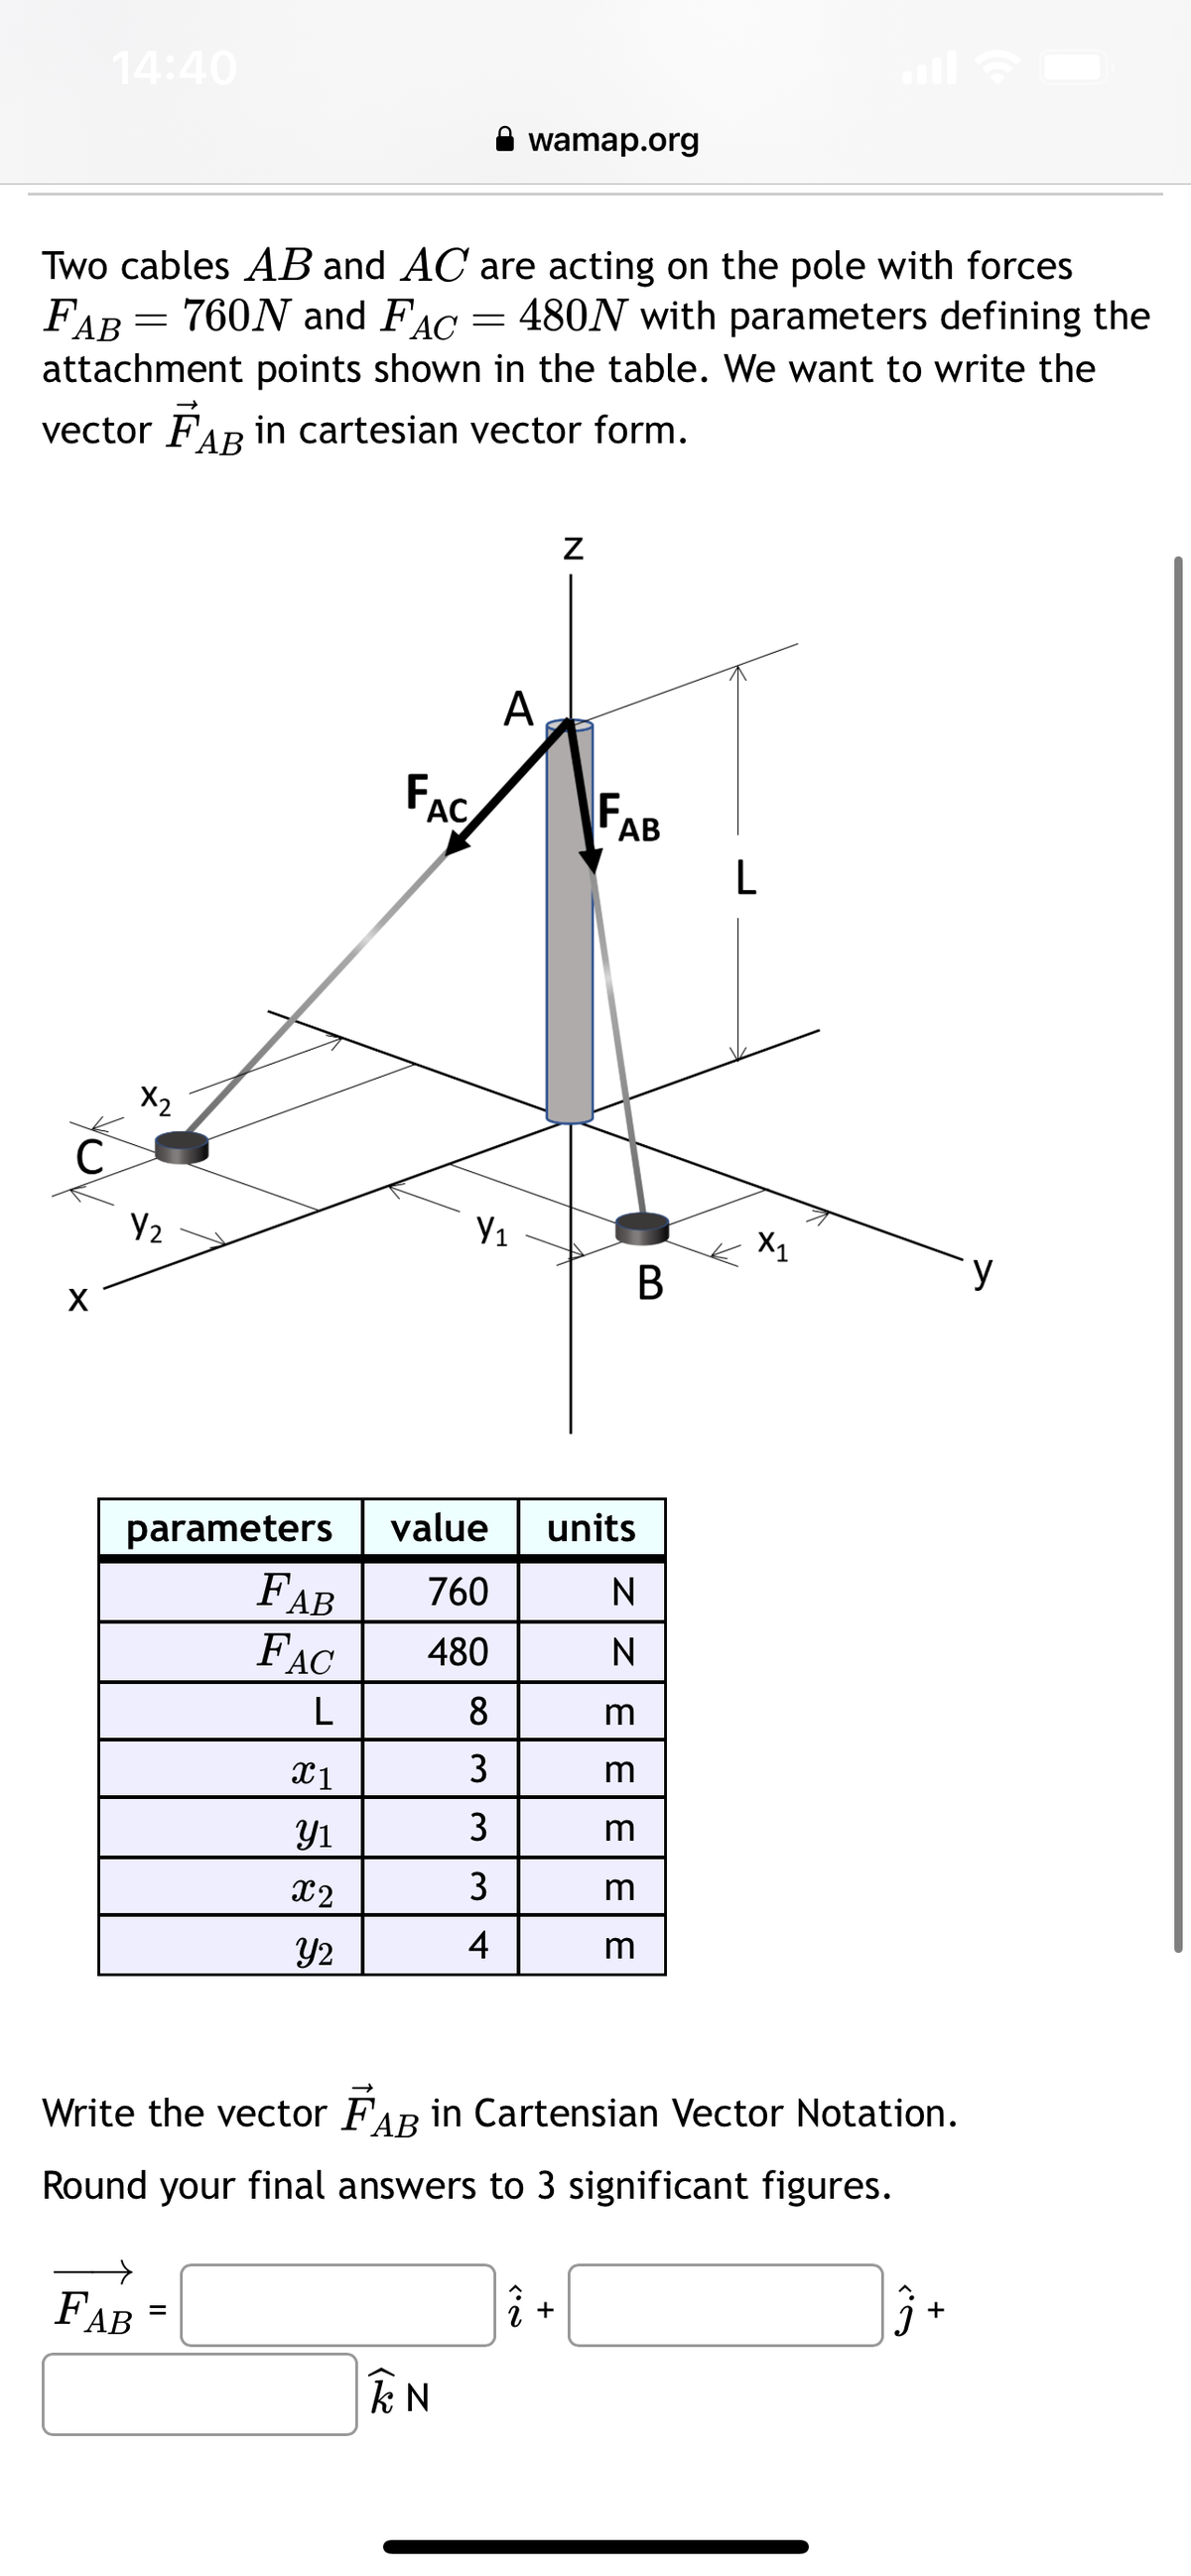 C
14:40
Two cables AB and AC are acting on the pole with forces
FAB 760N and FAC = 480N with parameters defining the
attachment points shown in the table. We want to write the
vector FAB in cartesian vector form.
X
-
X2
Y₂
FAB
FAC
X1
Y1
X2
Y2
=
Y₁
IN
parameters value units
FAB
760
N
FAC 480
L
8
3
wamap.org
33
A
3
4
Z
F₁
AB
î+
B
N
Ζεεειειε
m
m
m
Write the vector FAB in Cartensian Vector Notation.
Round your final answers to 3 significant figures.
m
L
X1
3+